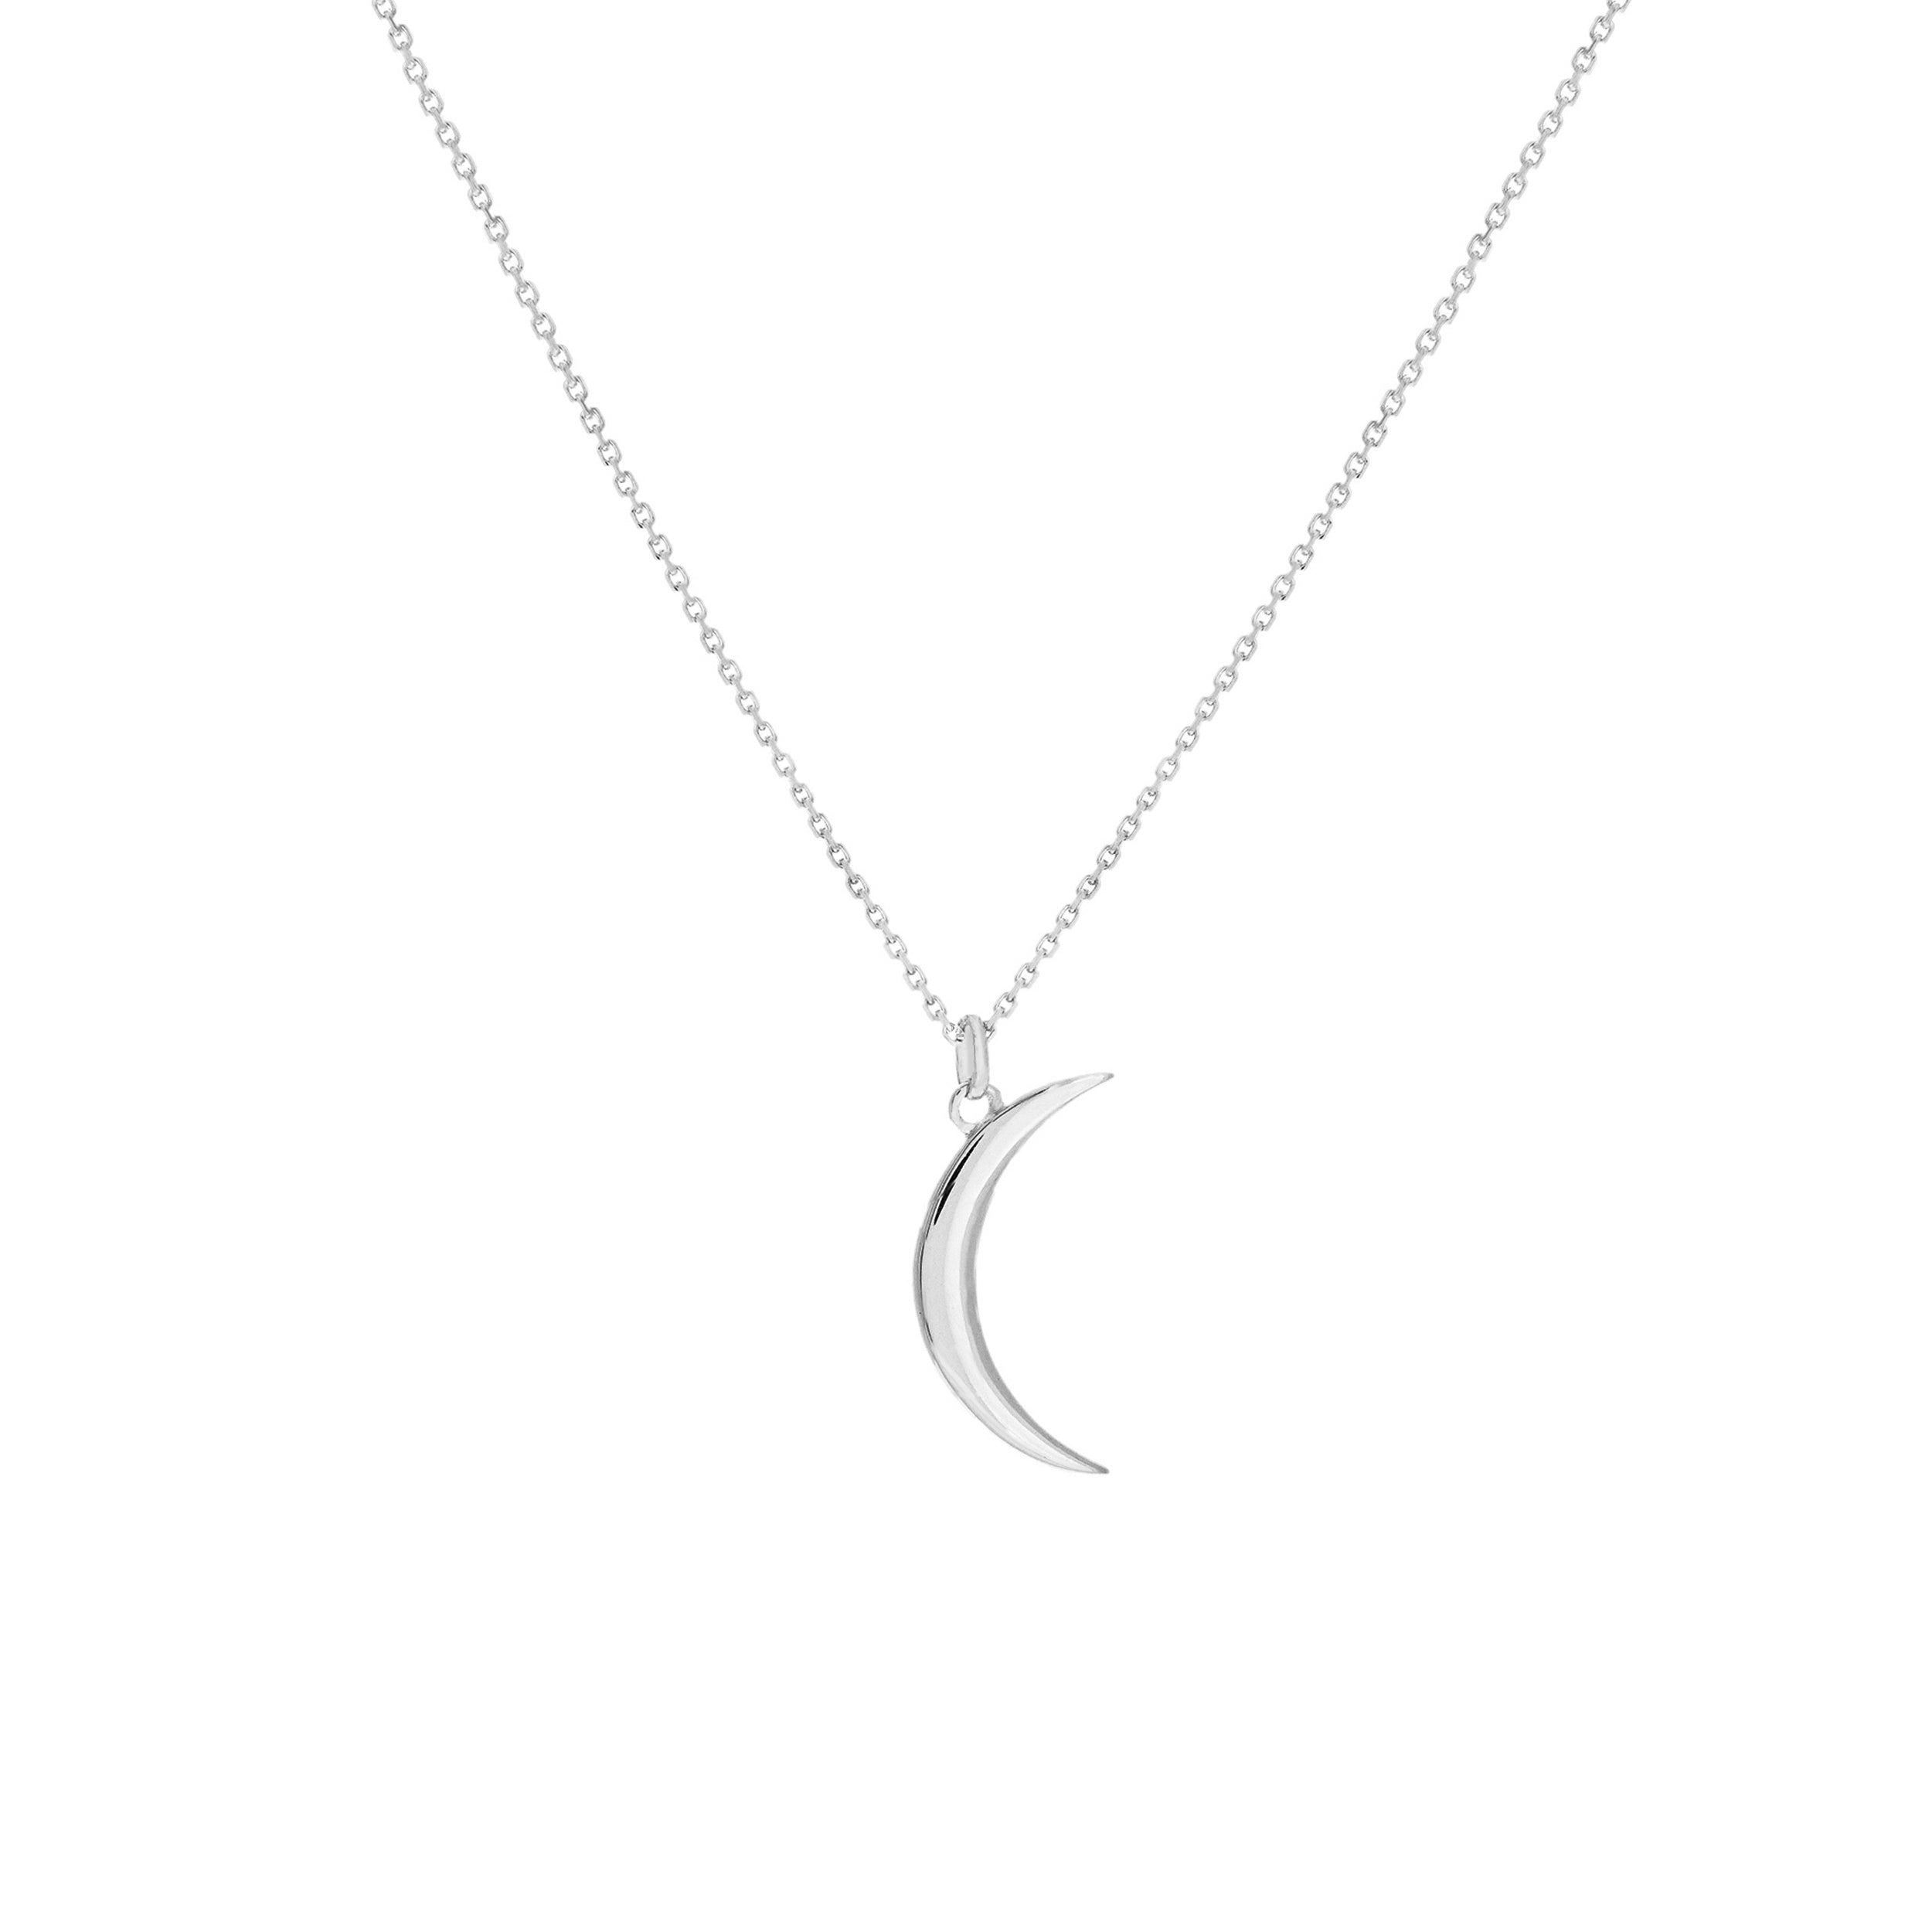 Sselects 14k Solid White Gold Dainty Crescent Necklace